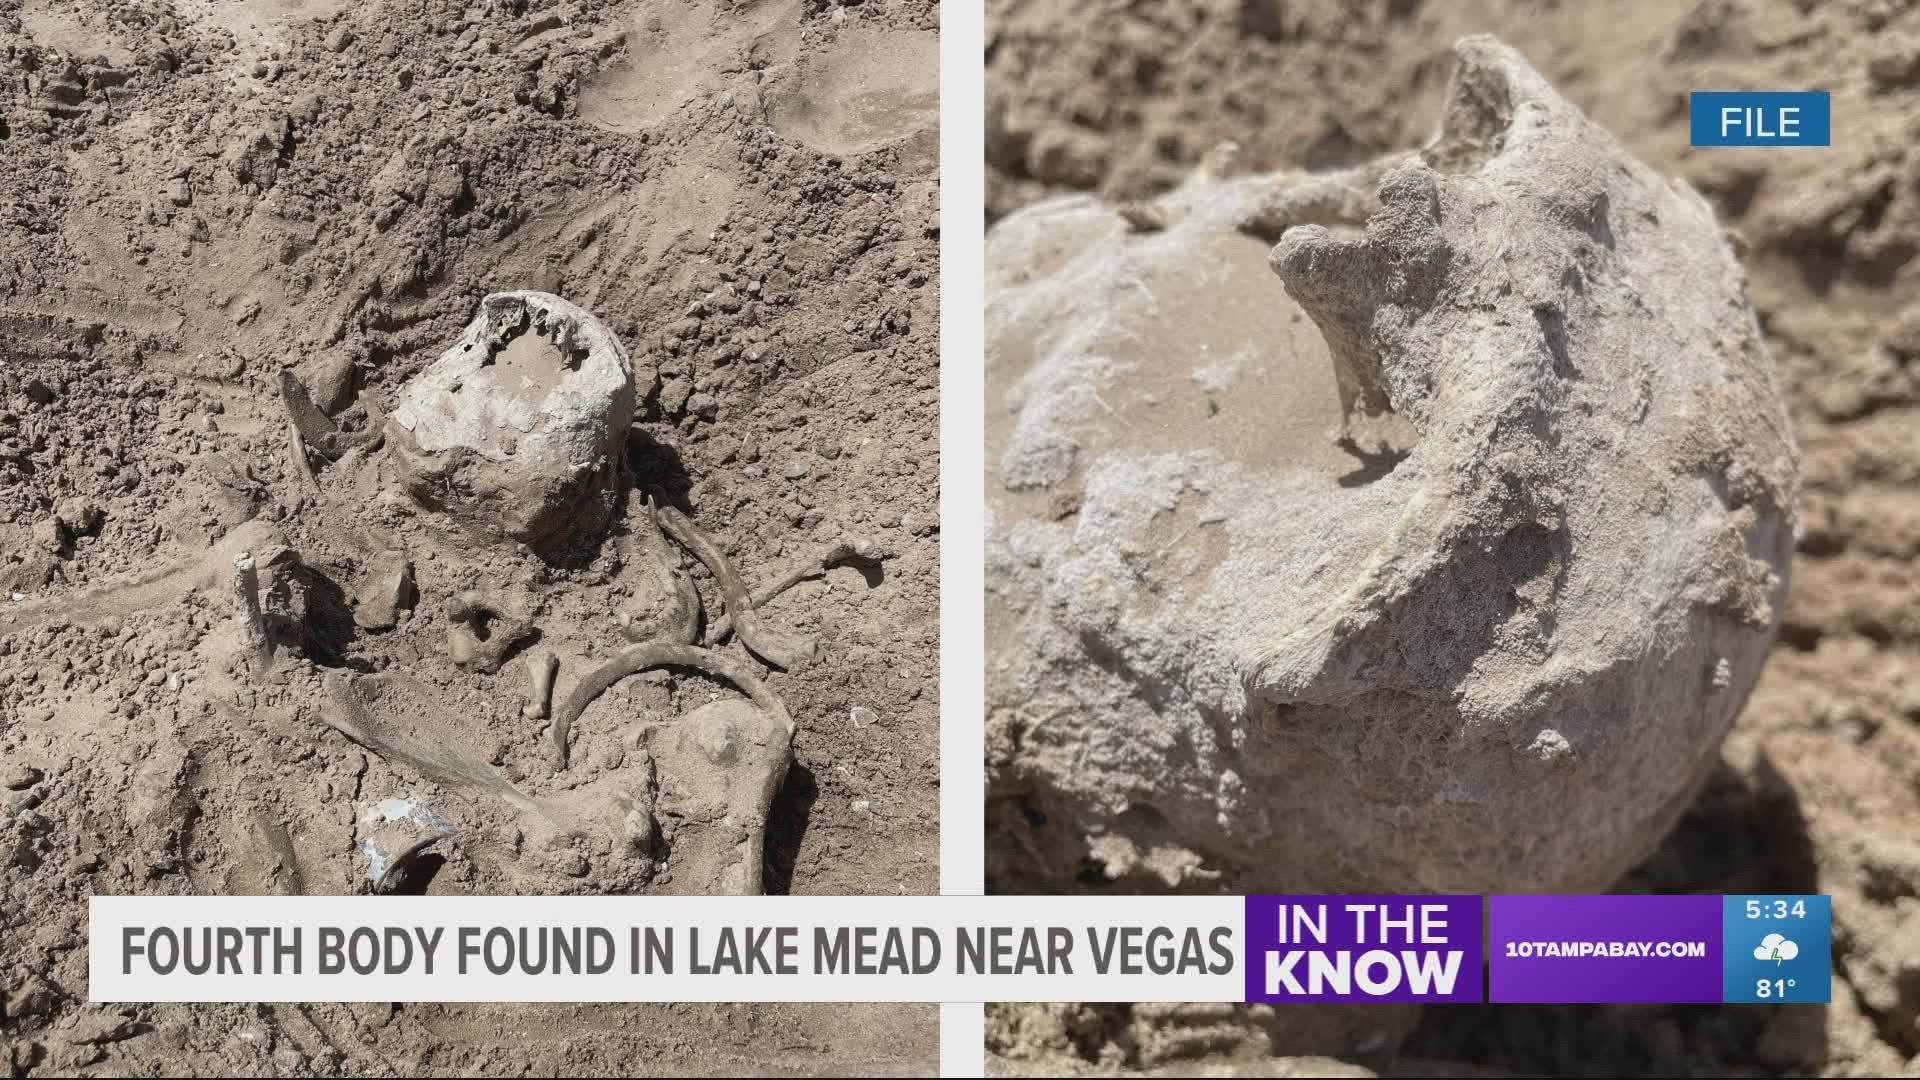 The four discoveries have people speculating about long-unsolved cases in nearby Las Vegas.